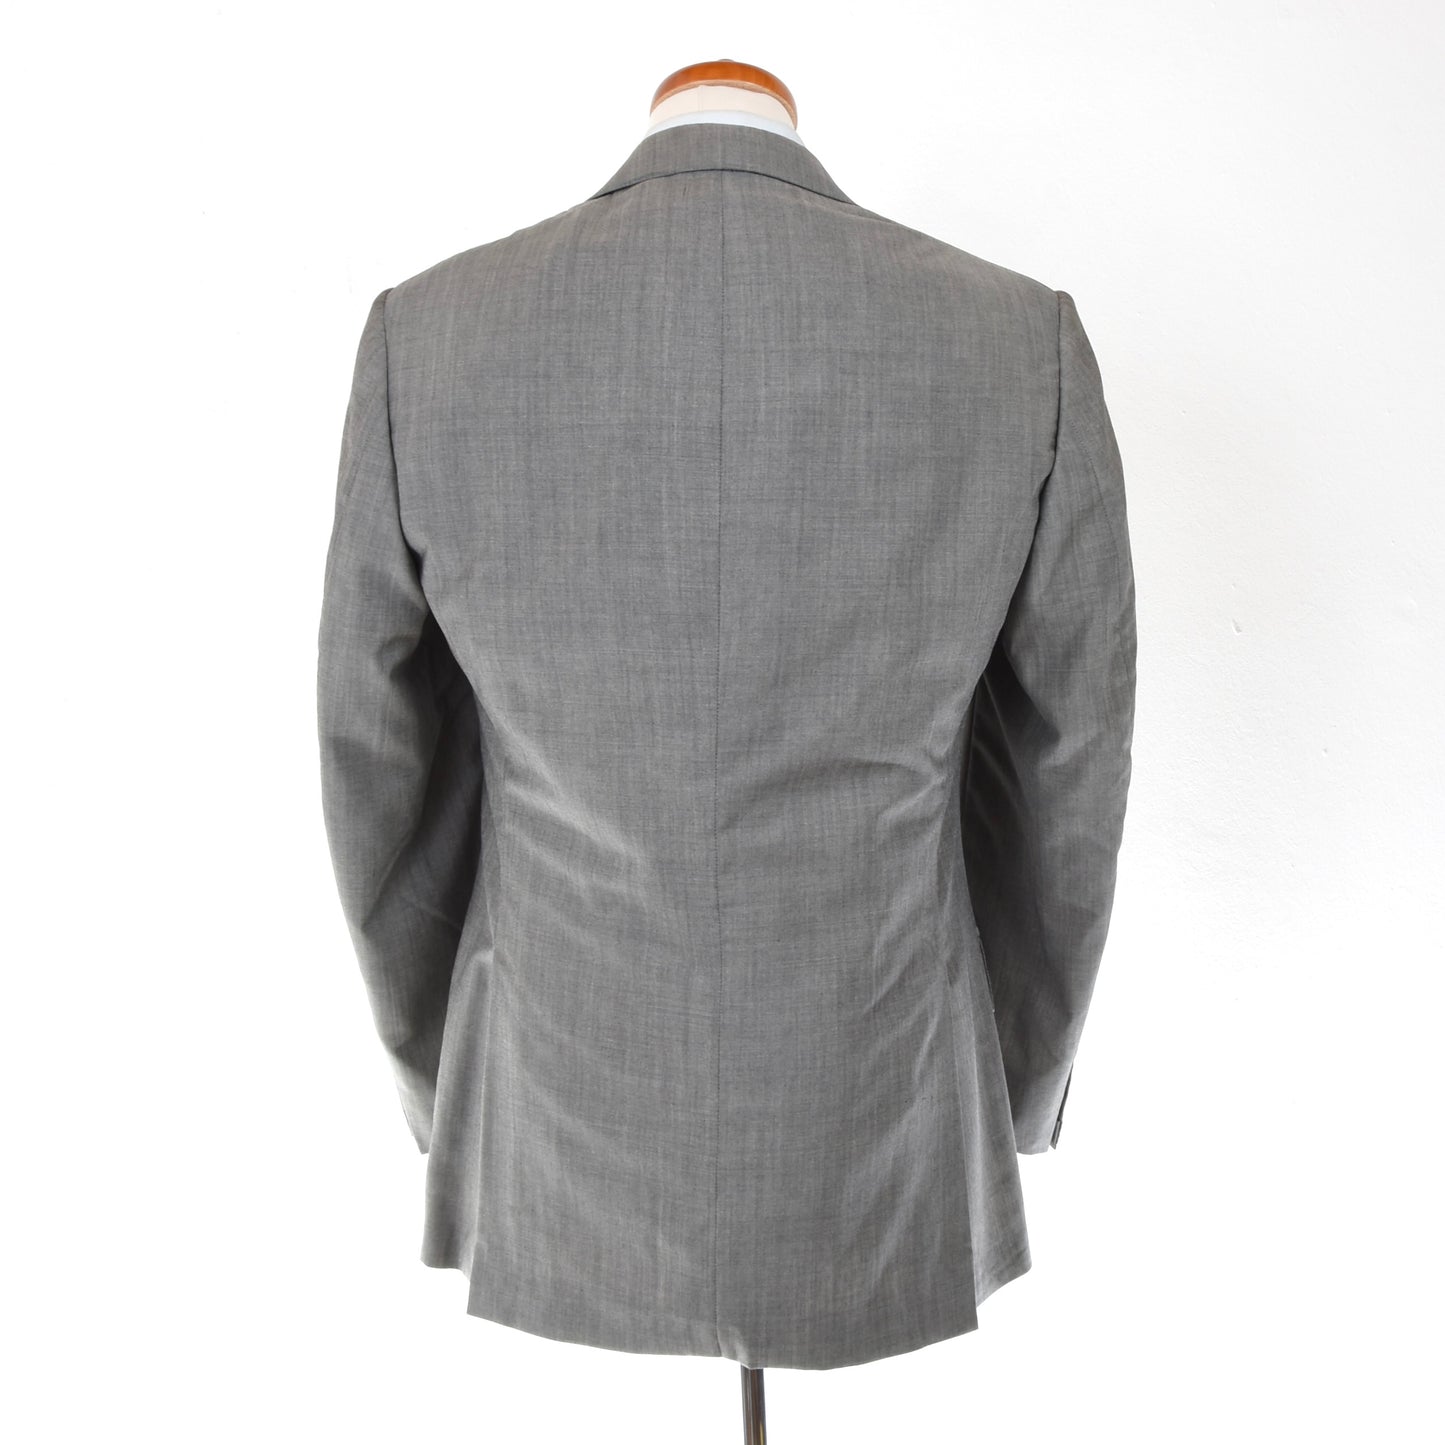 Cifonelli x St. Andrews Wool & Mohair Jacket Size 48 - Grey